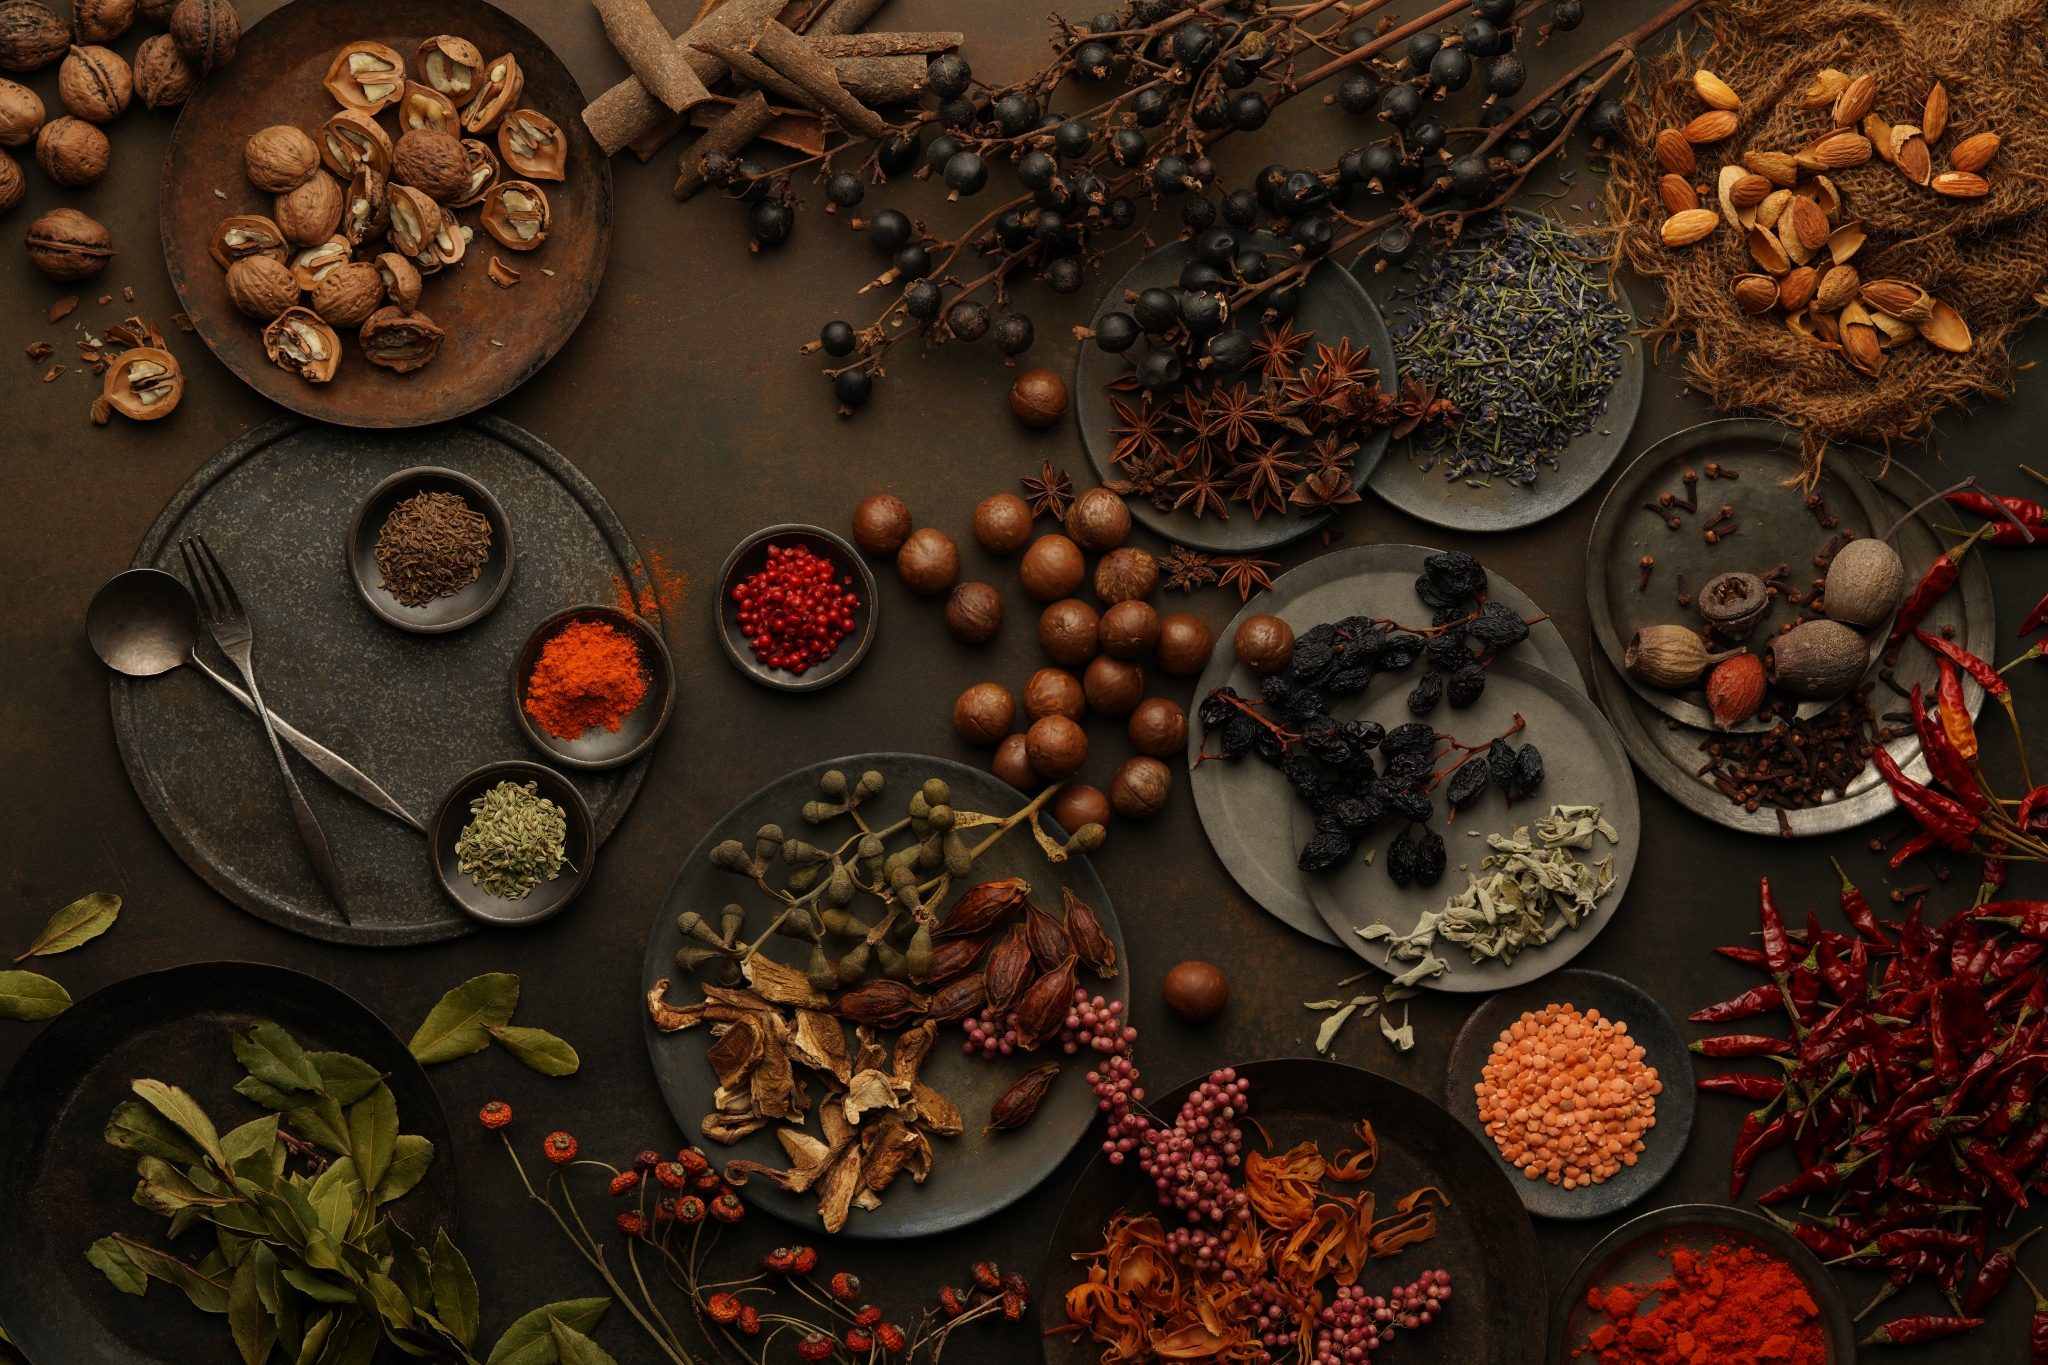 Aerial shot of fruits, nuts and spices spread on a table, some on plates